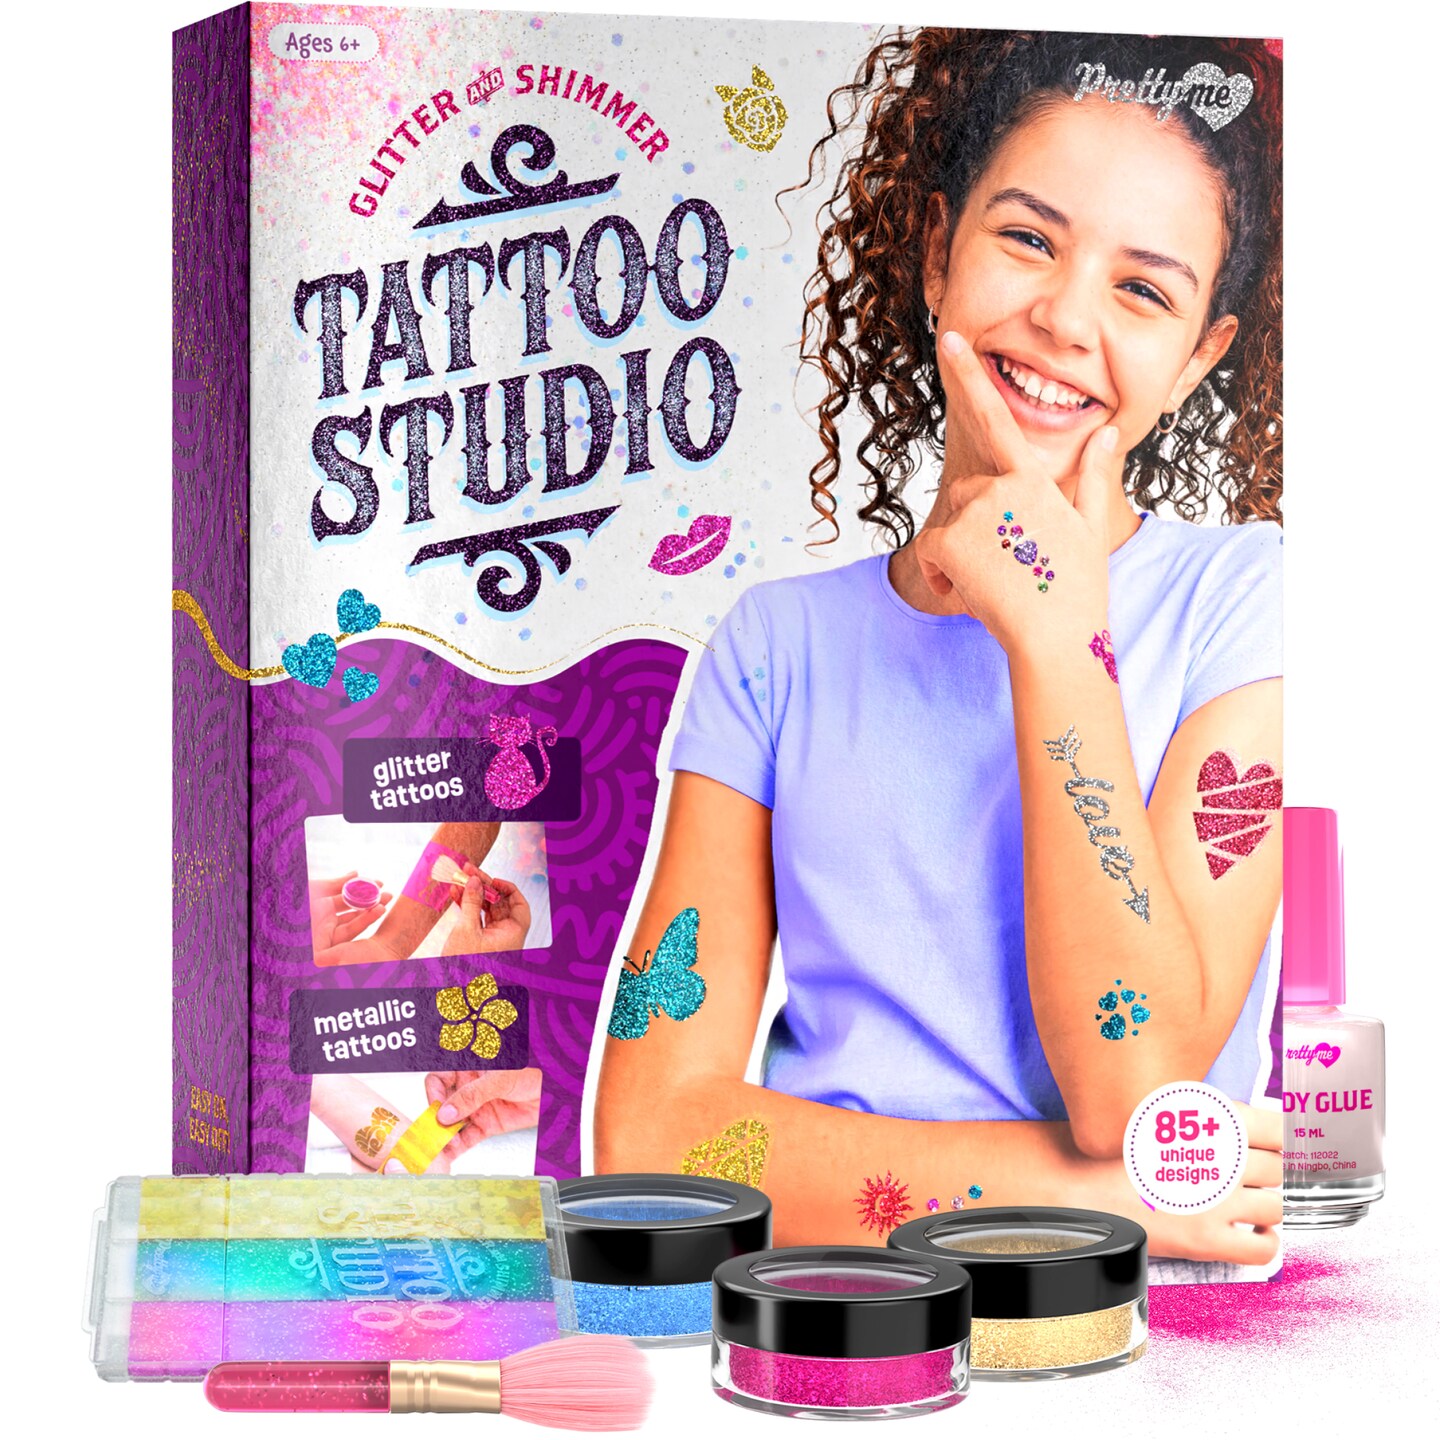 Temporary Shimmery Tattoo Studio Kit for Kids - Glitter &#x26; Metallic Fake Tattoos for Girls - Birthday Gift Ideas for Girl - Best Craft Kits Toys Stuff for Ages 6, 7, 8, 9, 10, 11 Year Old - Cool Gifts